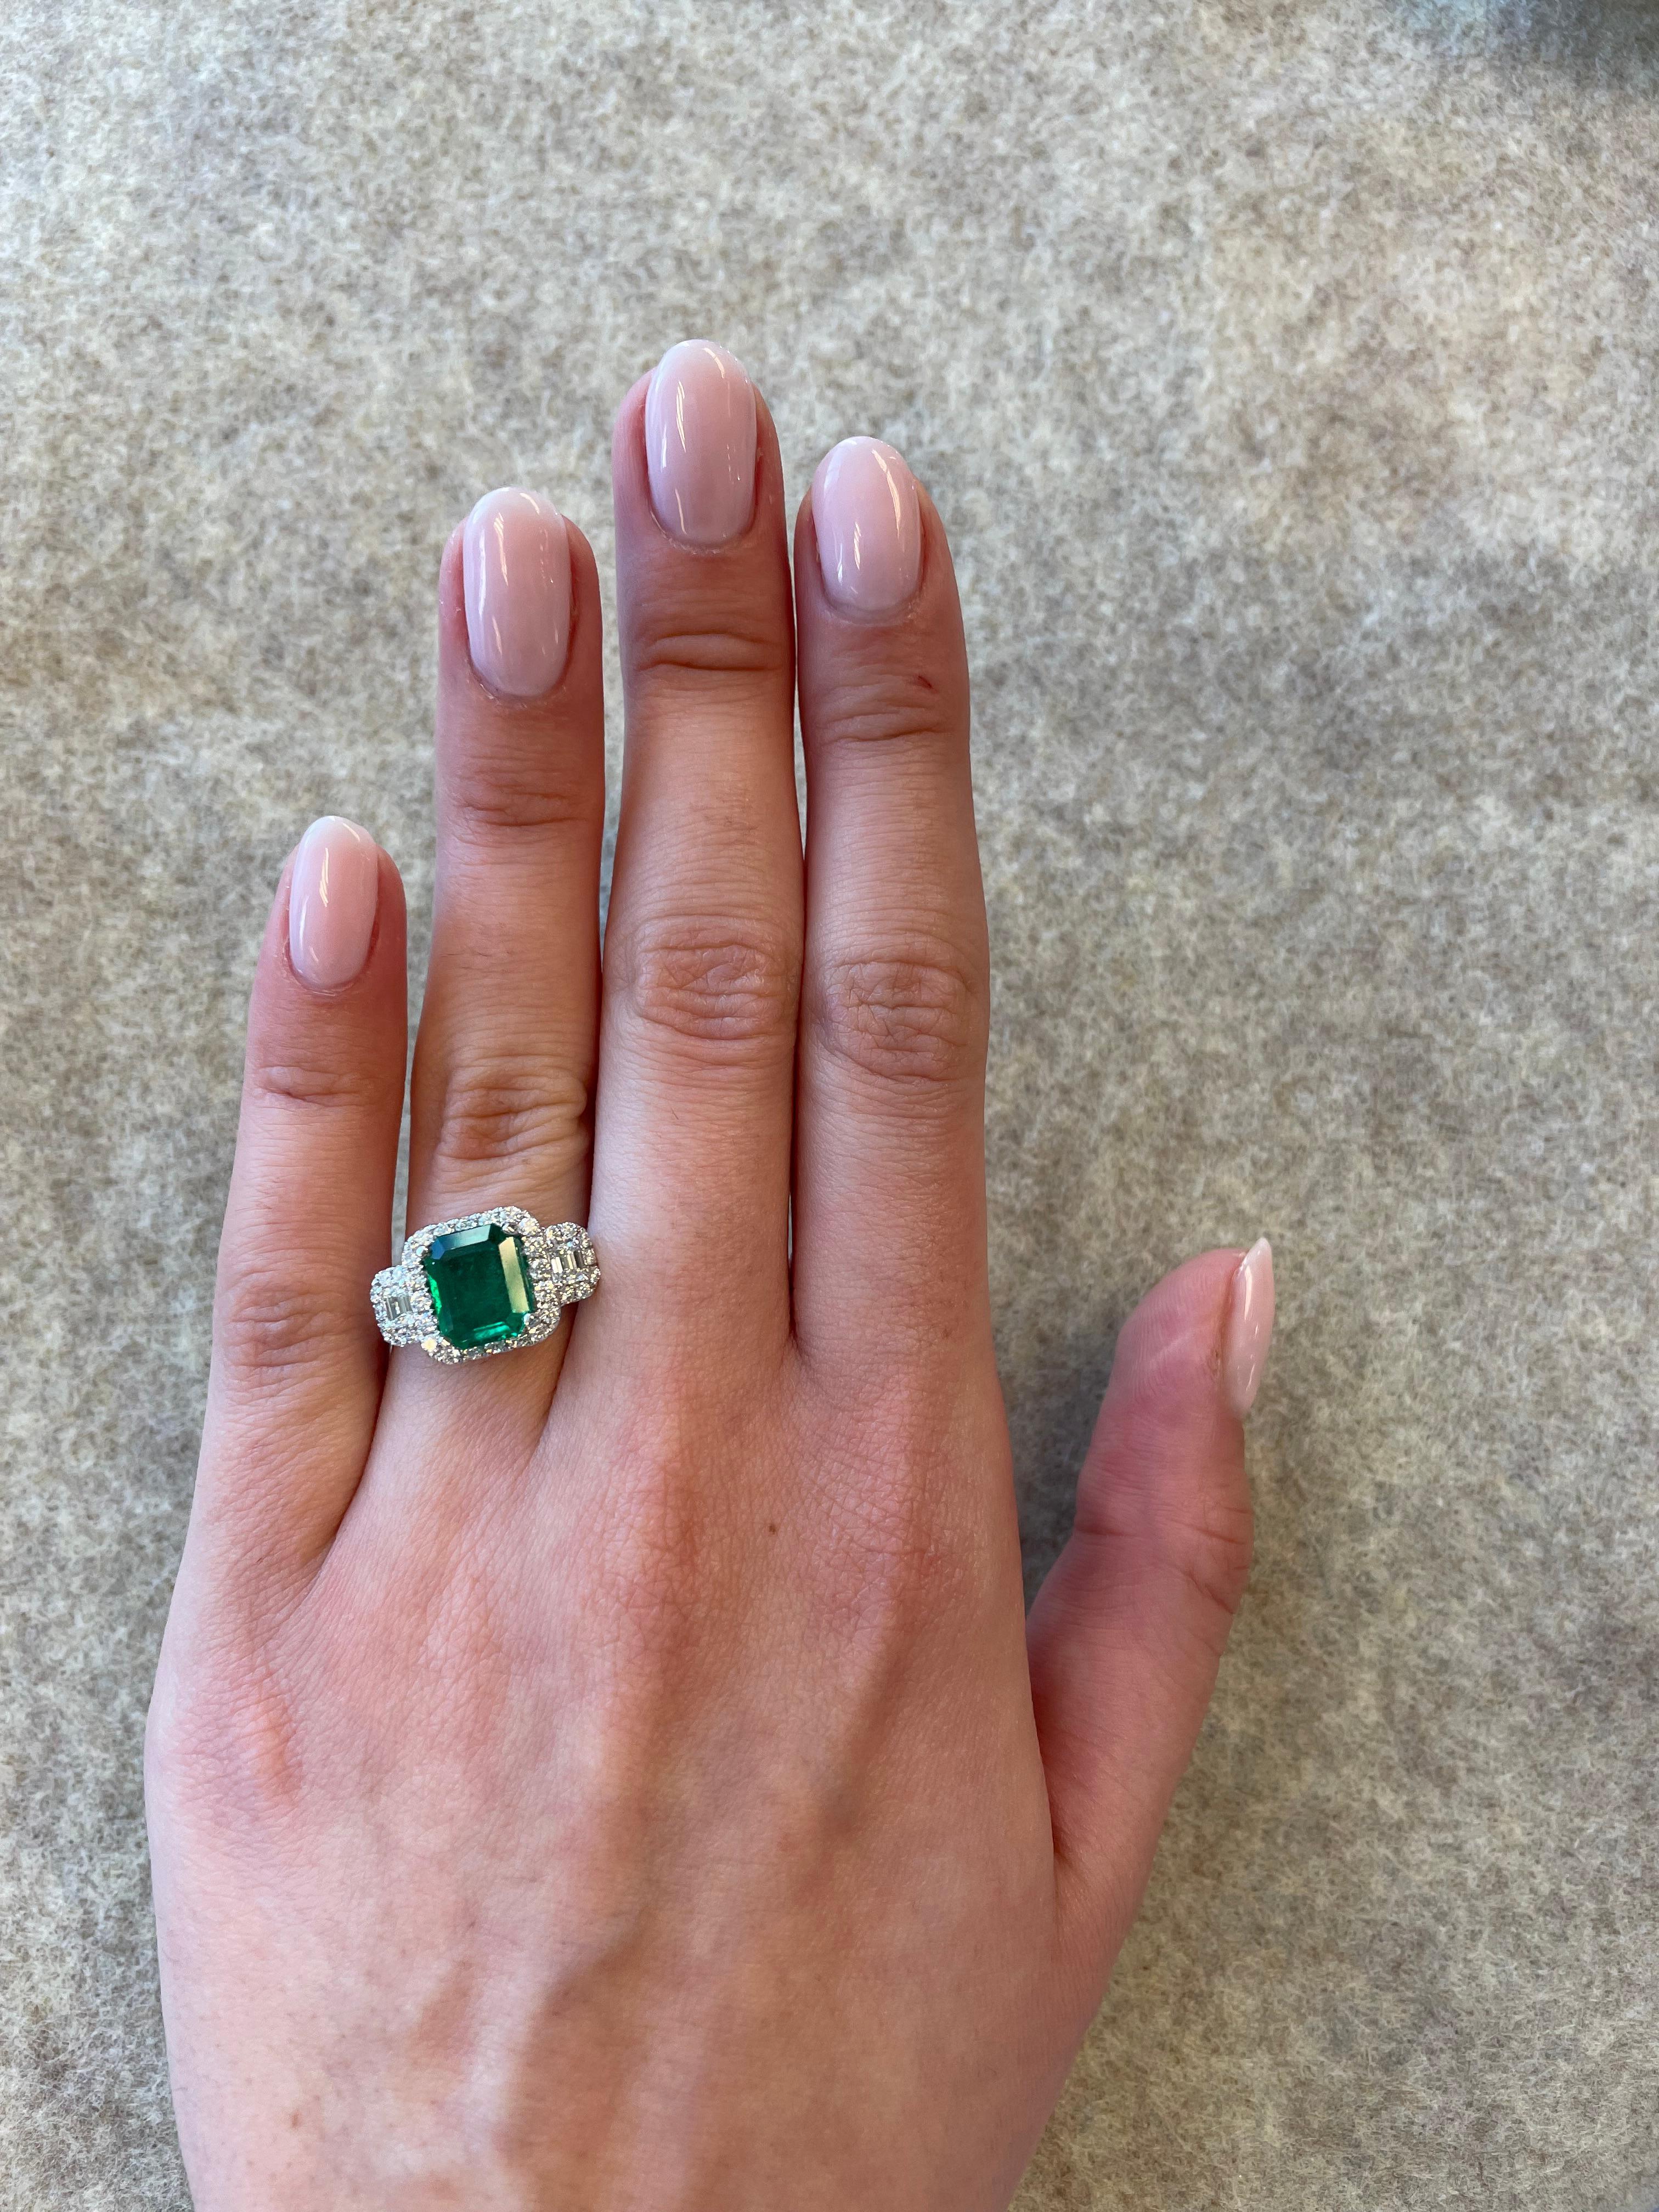 Stunning emerald and diamond three stone ring with halo. By Alexander of Beverly Hills. 
2.91 carats total gemstone weight.
1.82 carat emerald cut emerald. 2 emerald cut diamonds, 0.31ct. Approximately H/I color and VS clarity. Complimented by 0.70